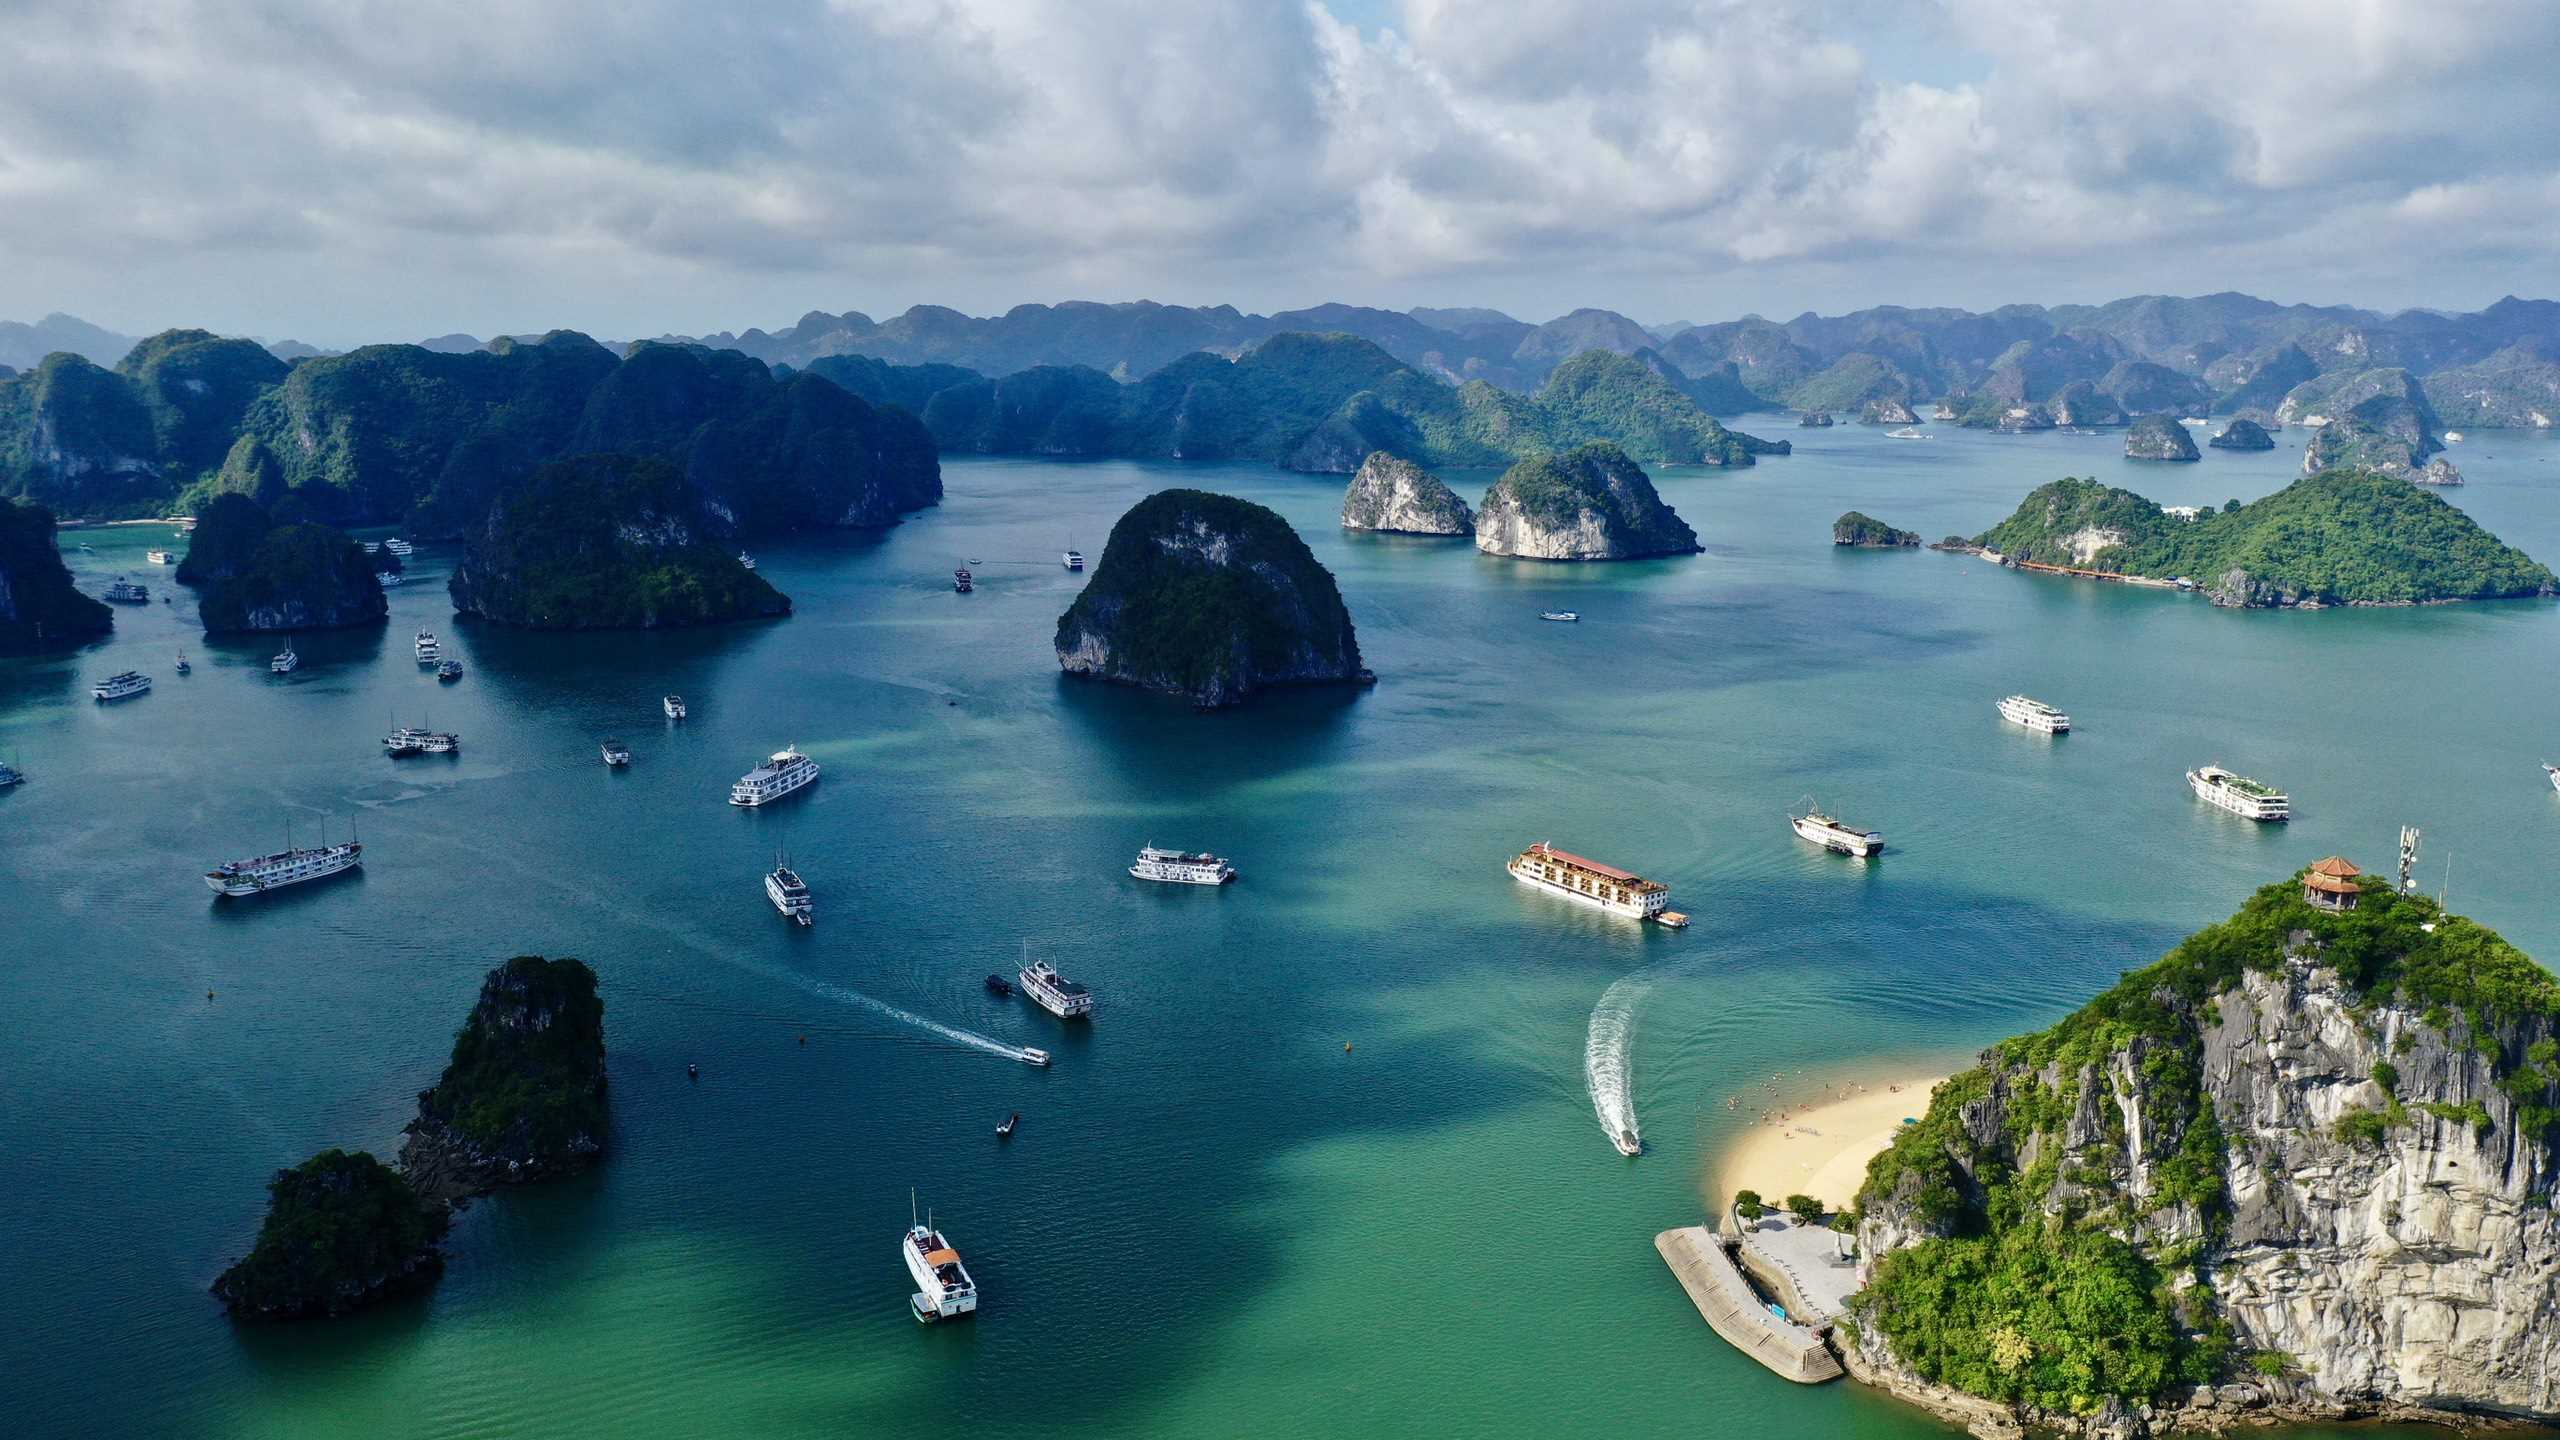 Quang Ninh - a safe, friendly and attractive destination - ready to welcome tourists back